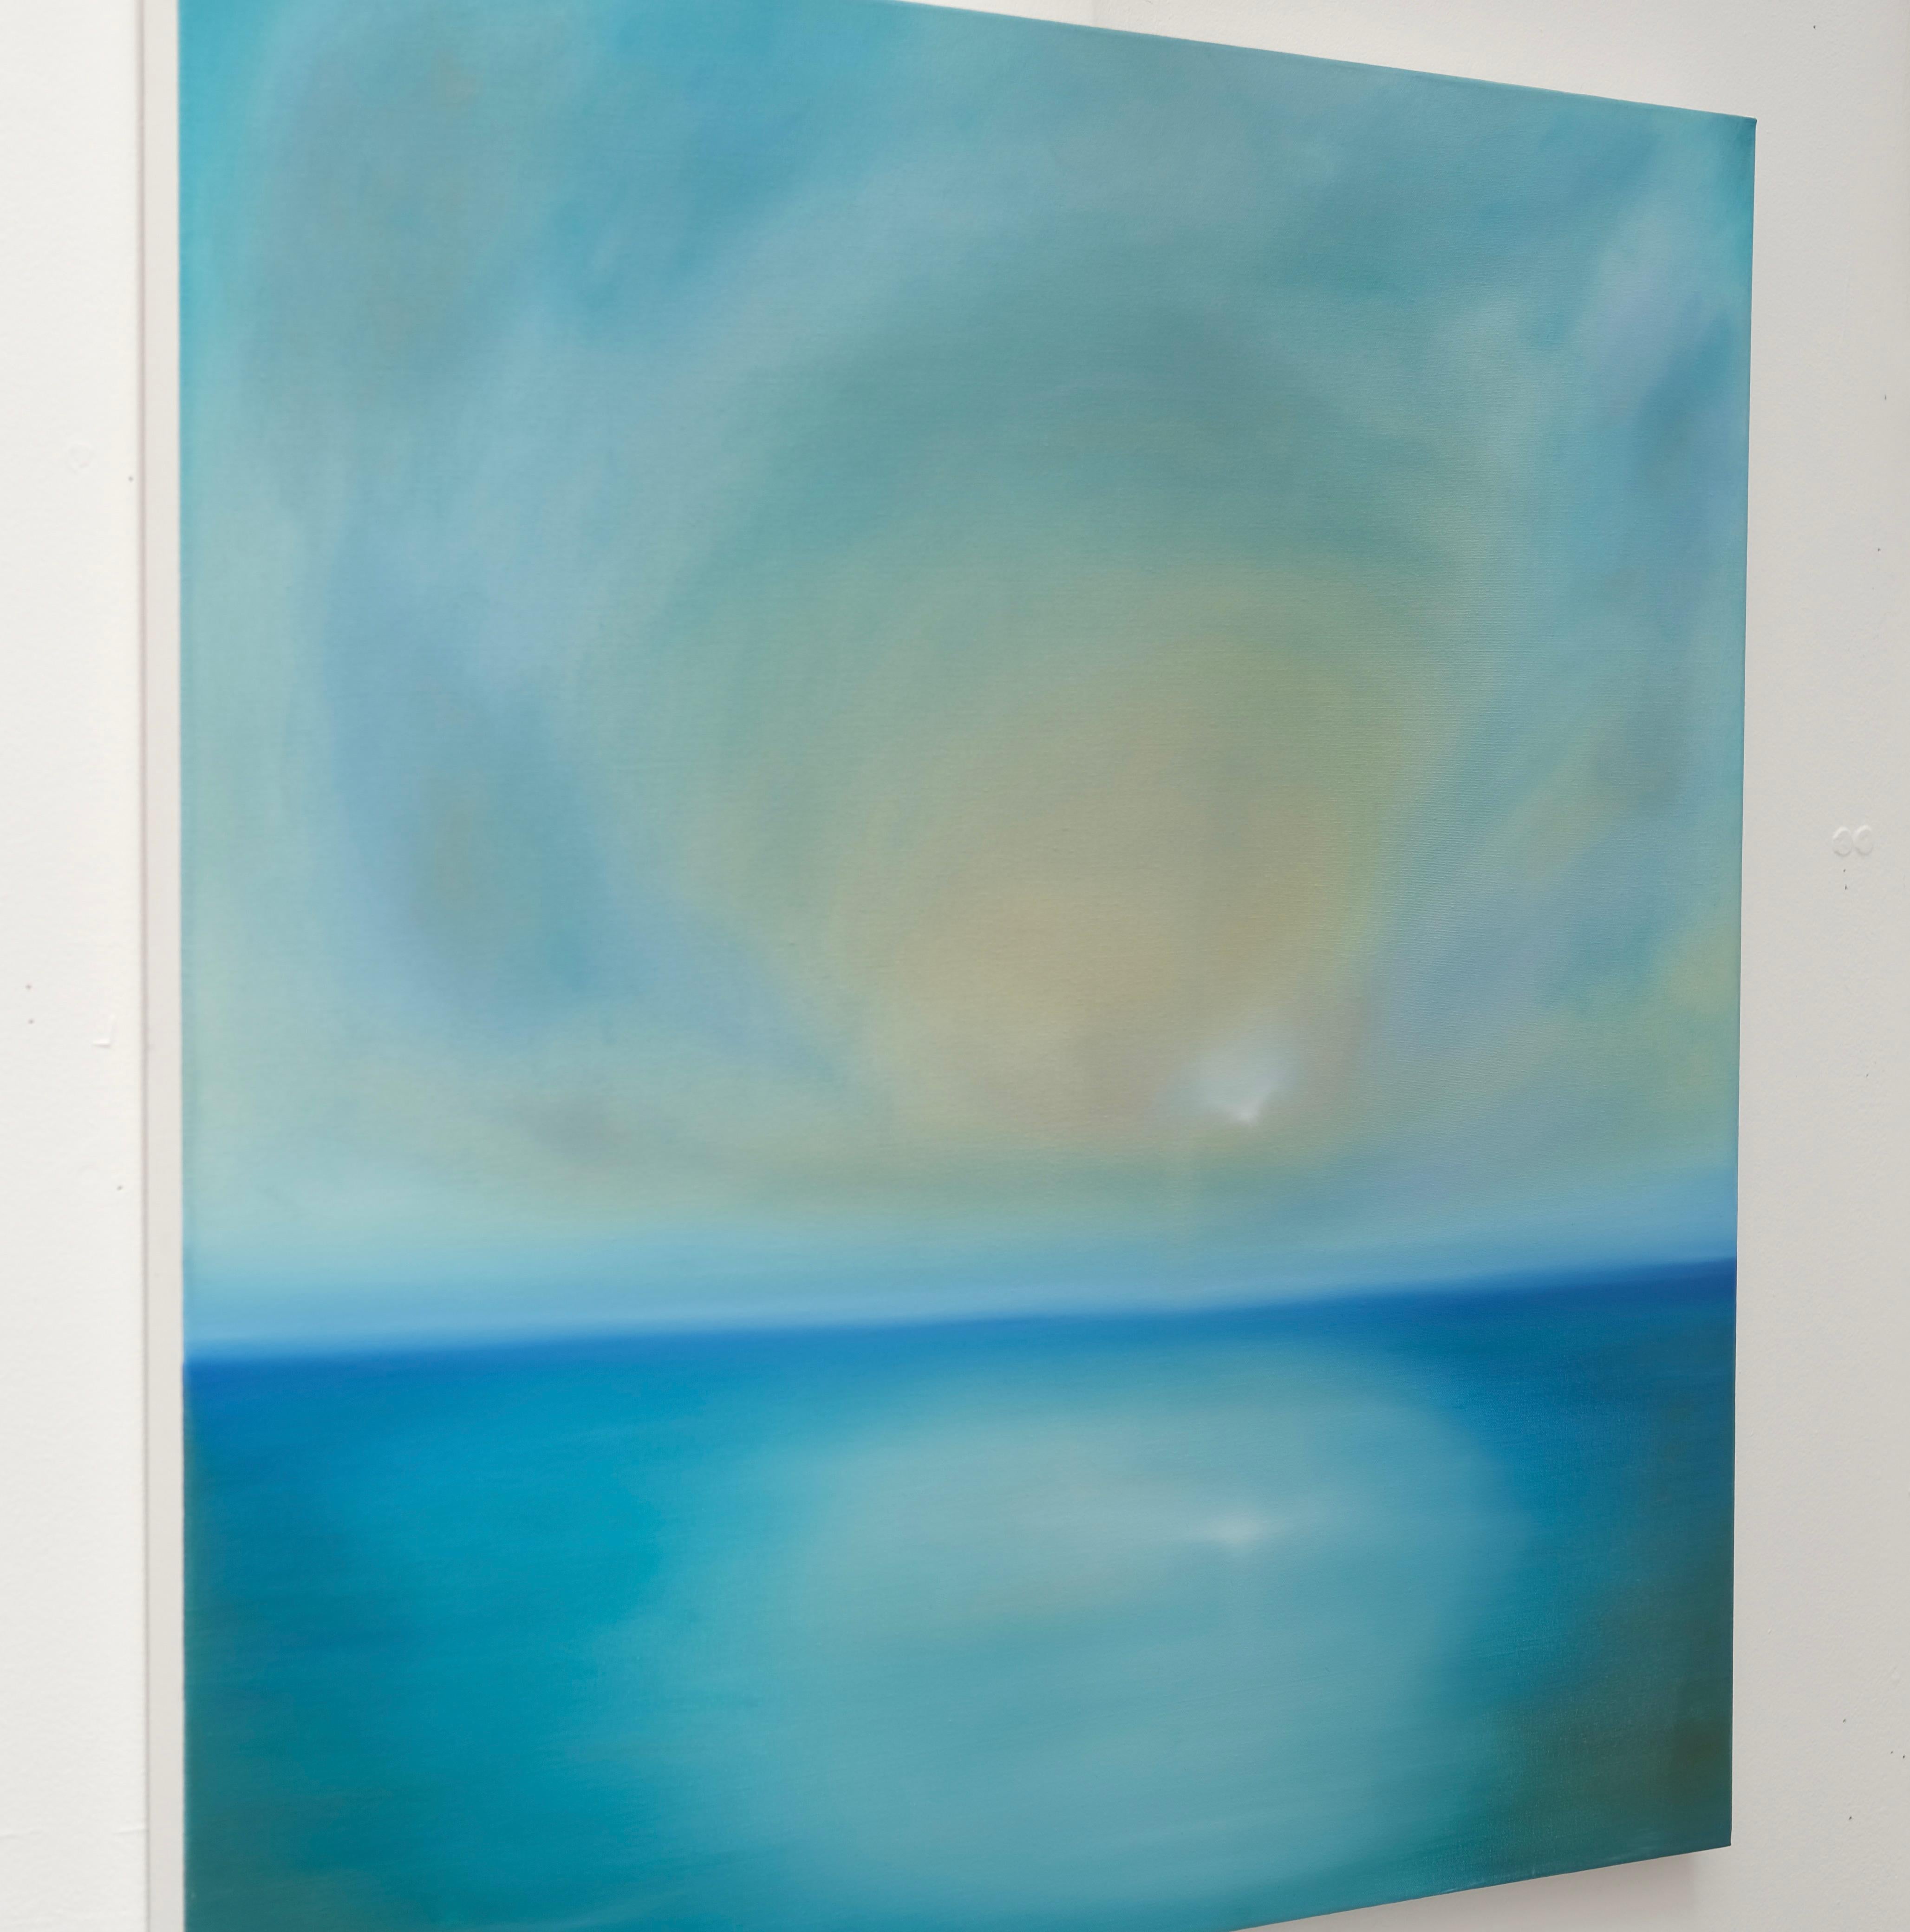 Calm Seas-original abstract seascape-ocean painting for sale-contemporary Art - Expressionnisme abstrait Painting par Jonathan Speed